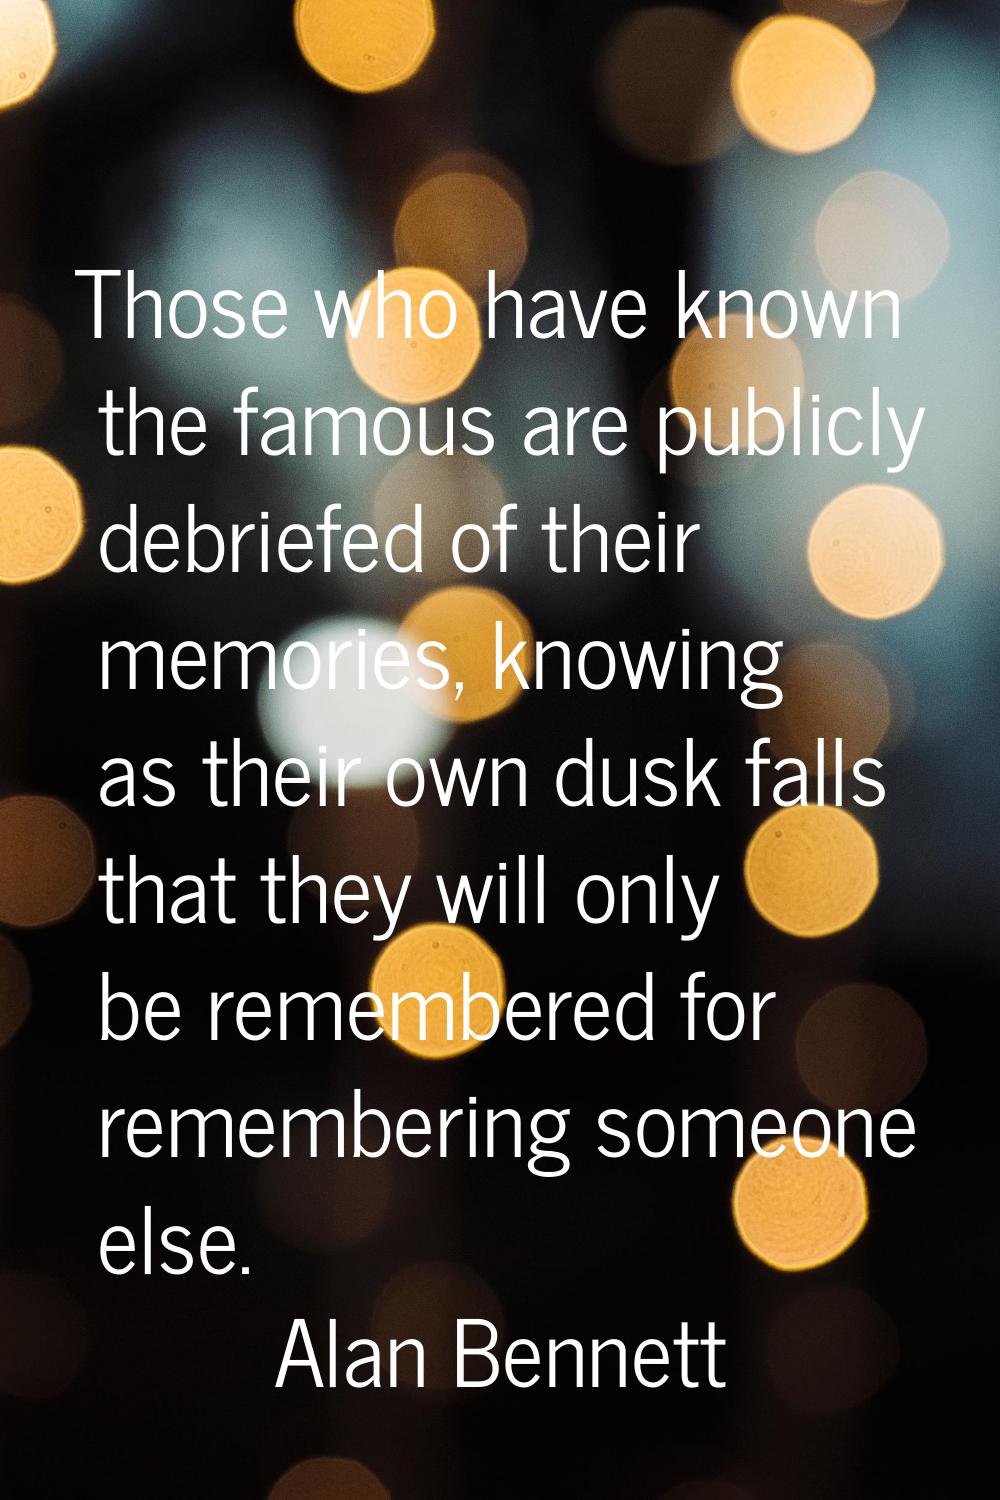 Those who have known the famous are publicly debriefed of their memories, knowing as their own dusk